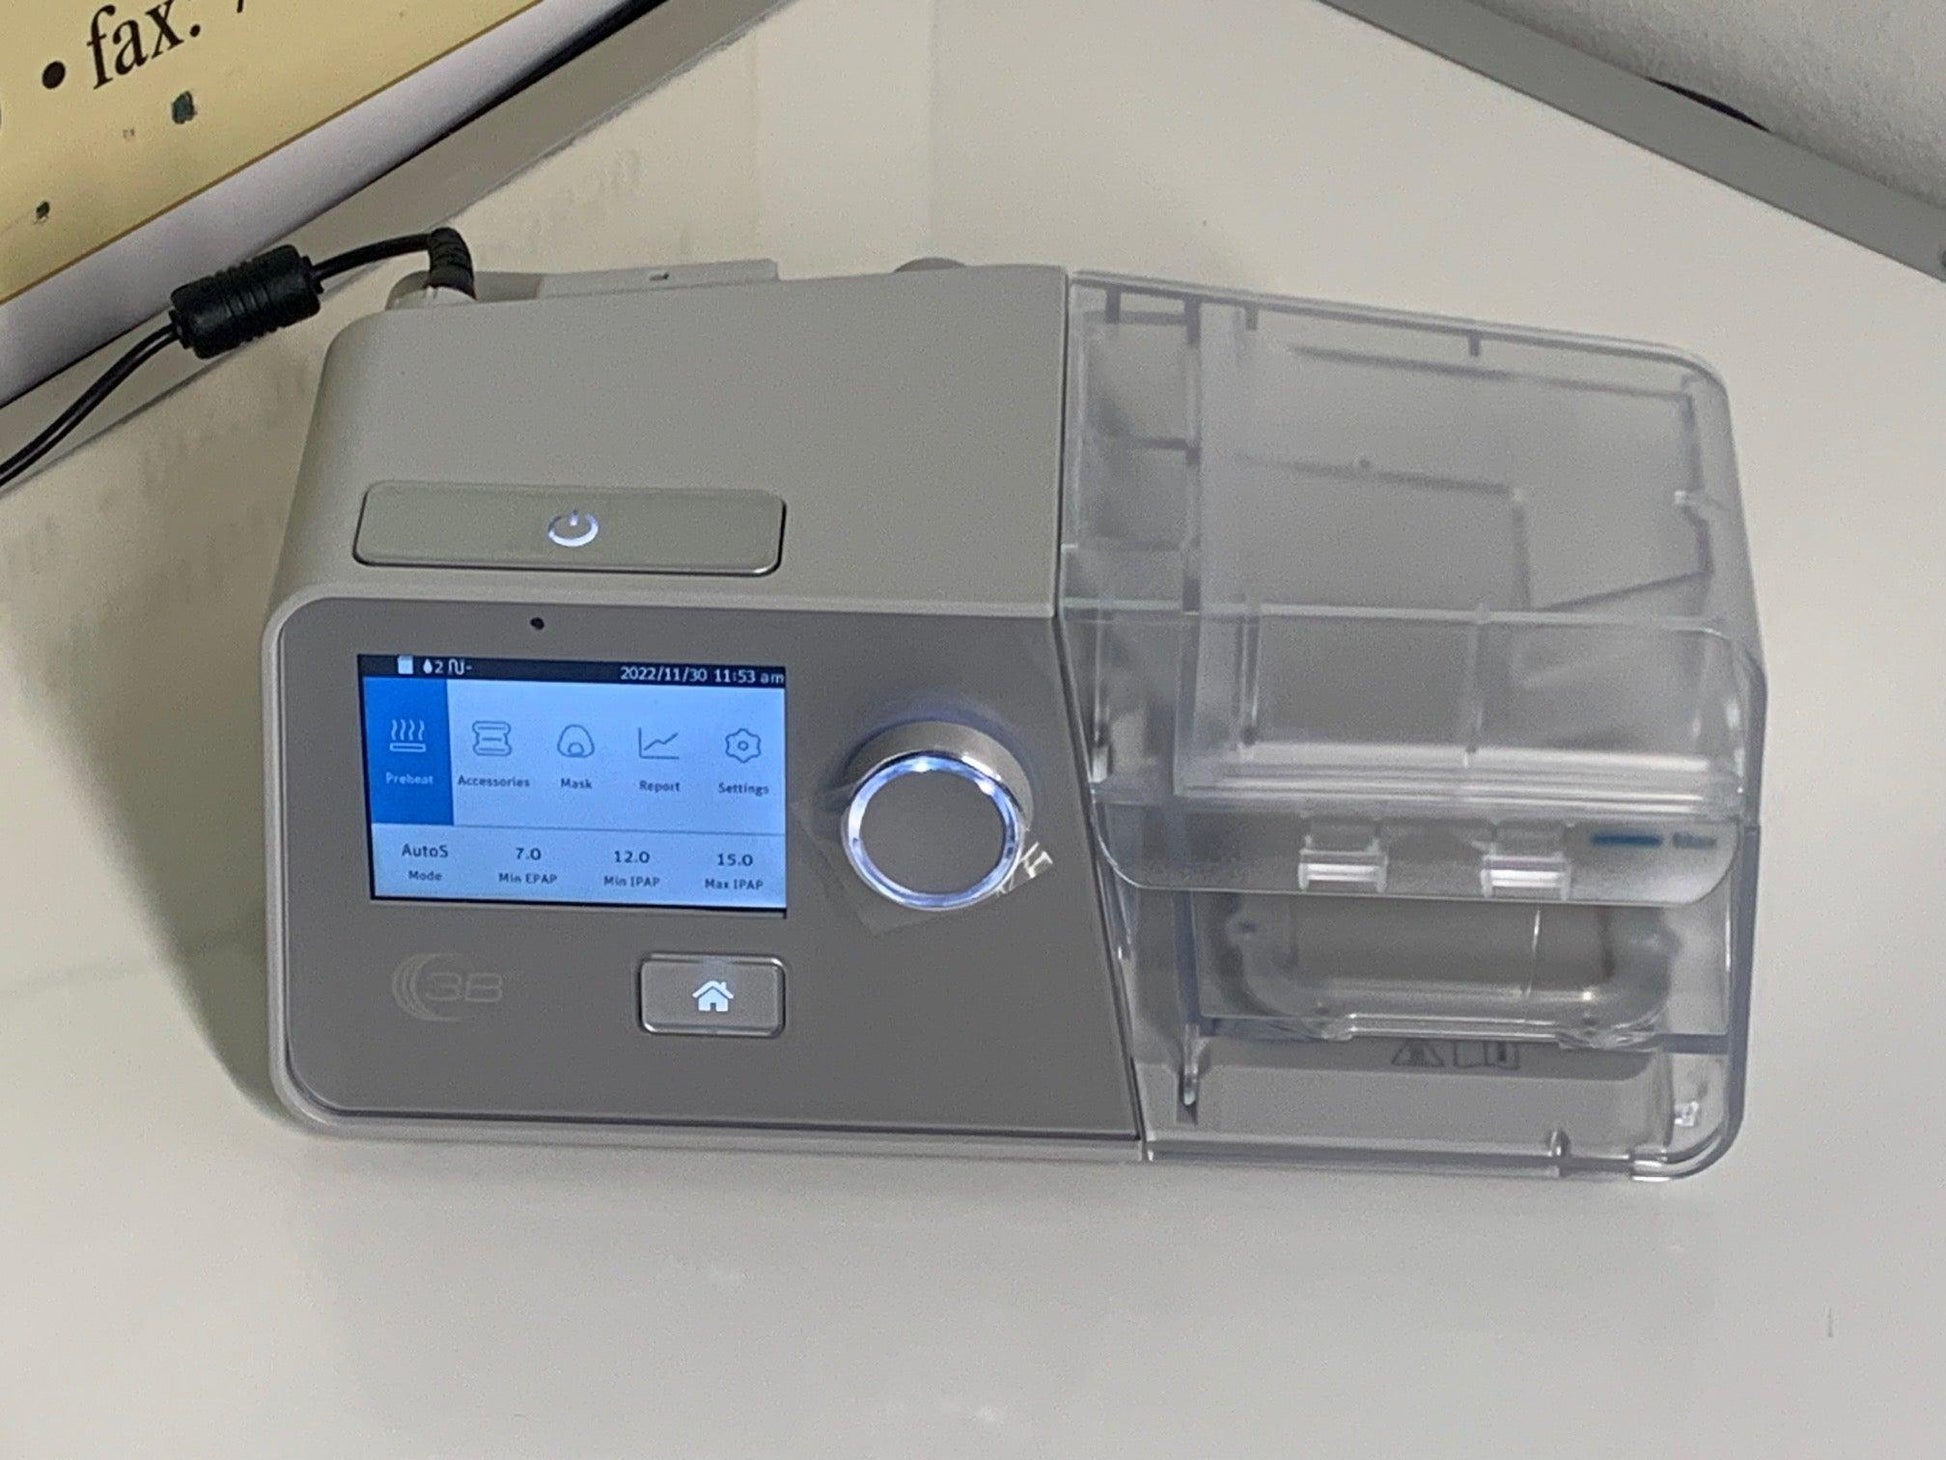 NEW 3B Luna G3 25A Auto-BiPAP Machine Package with Heated Humidifier - MBR Medicals